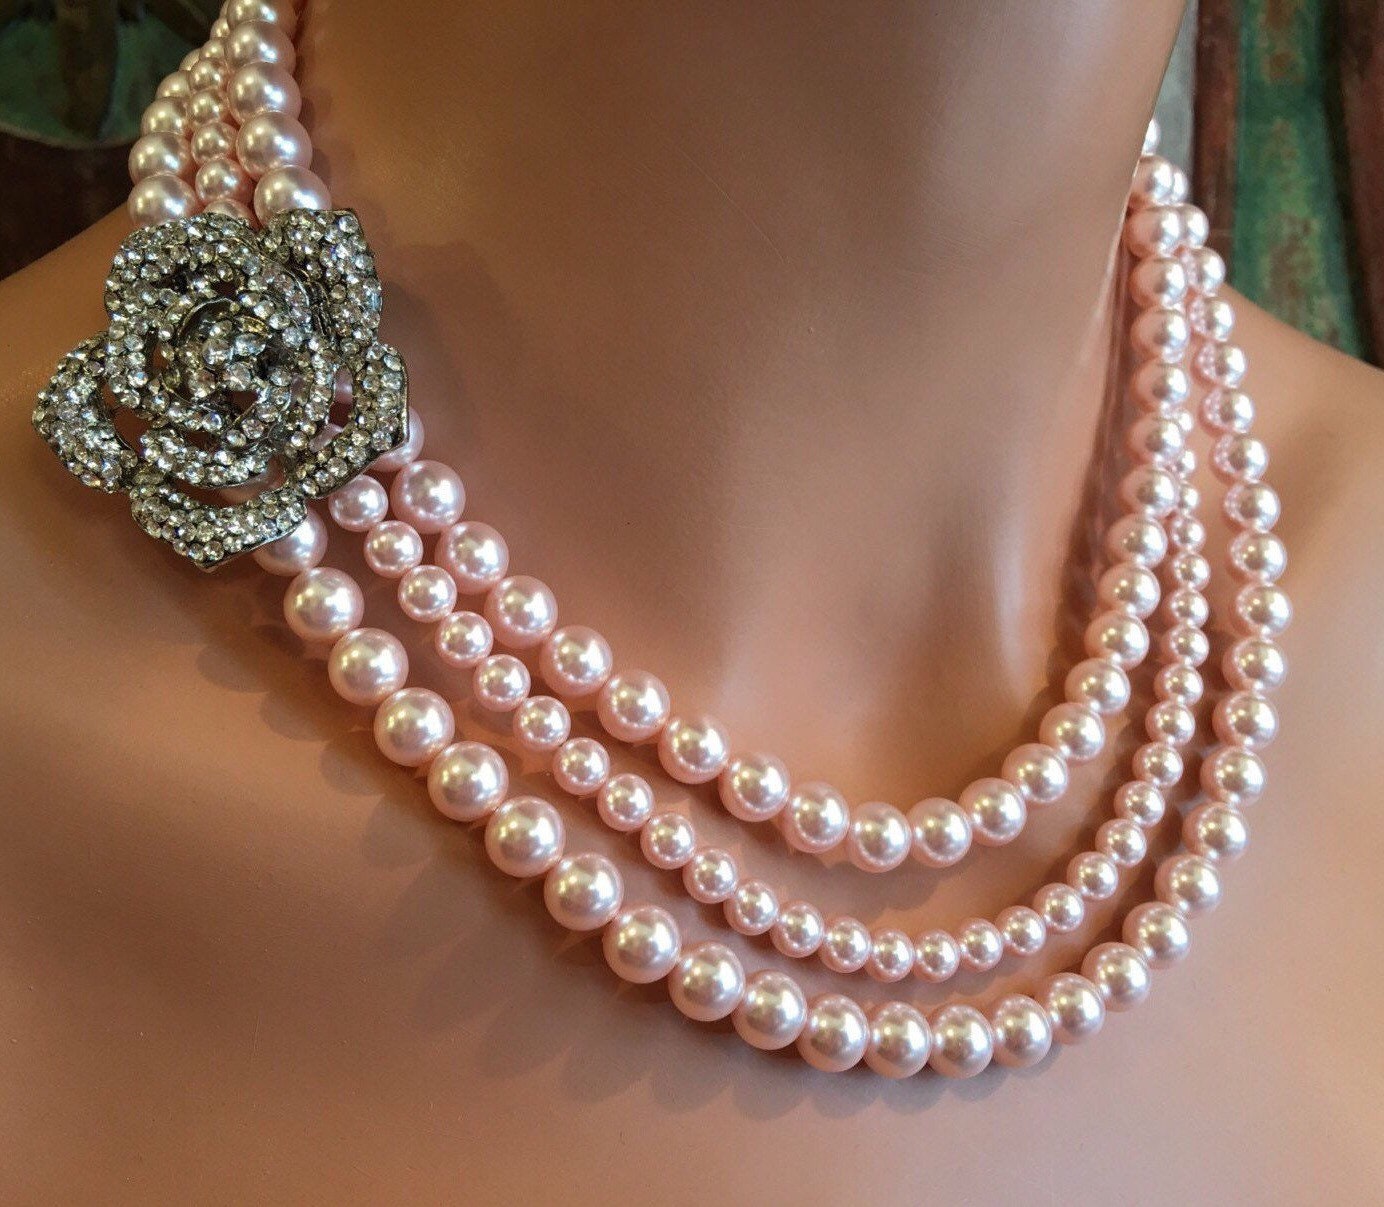 Blush Pearl Necklace with brooch and Earrings Set 3 multi strands Rosaline Pink Swarovski pearls Earrings included bridal wedding jewelry